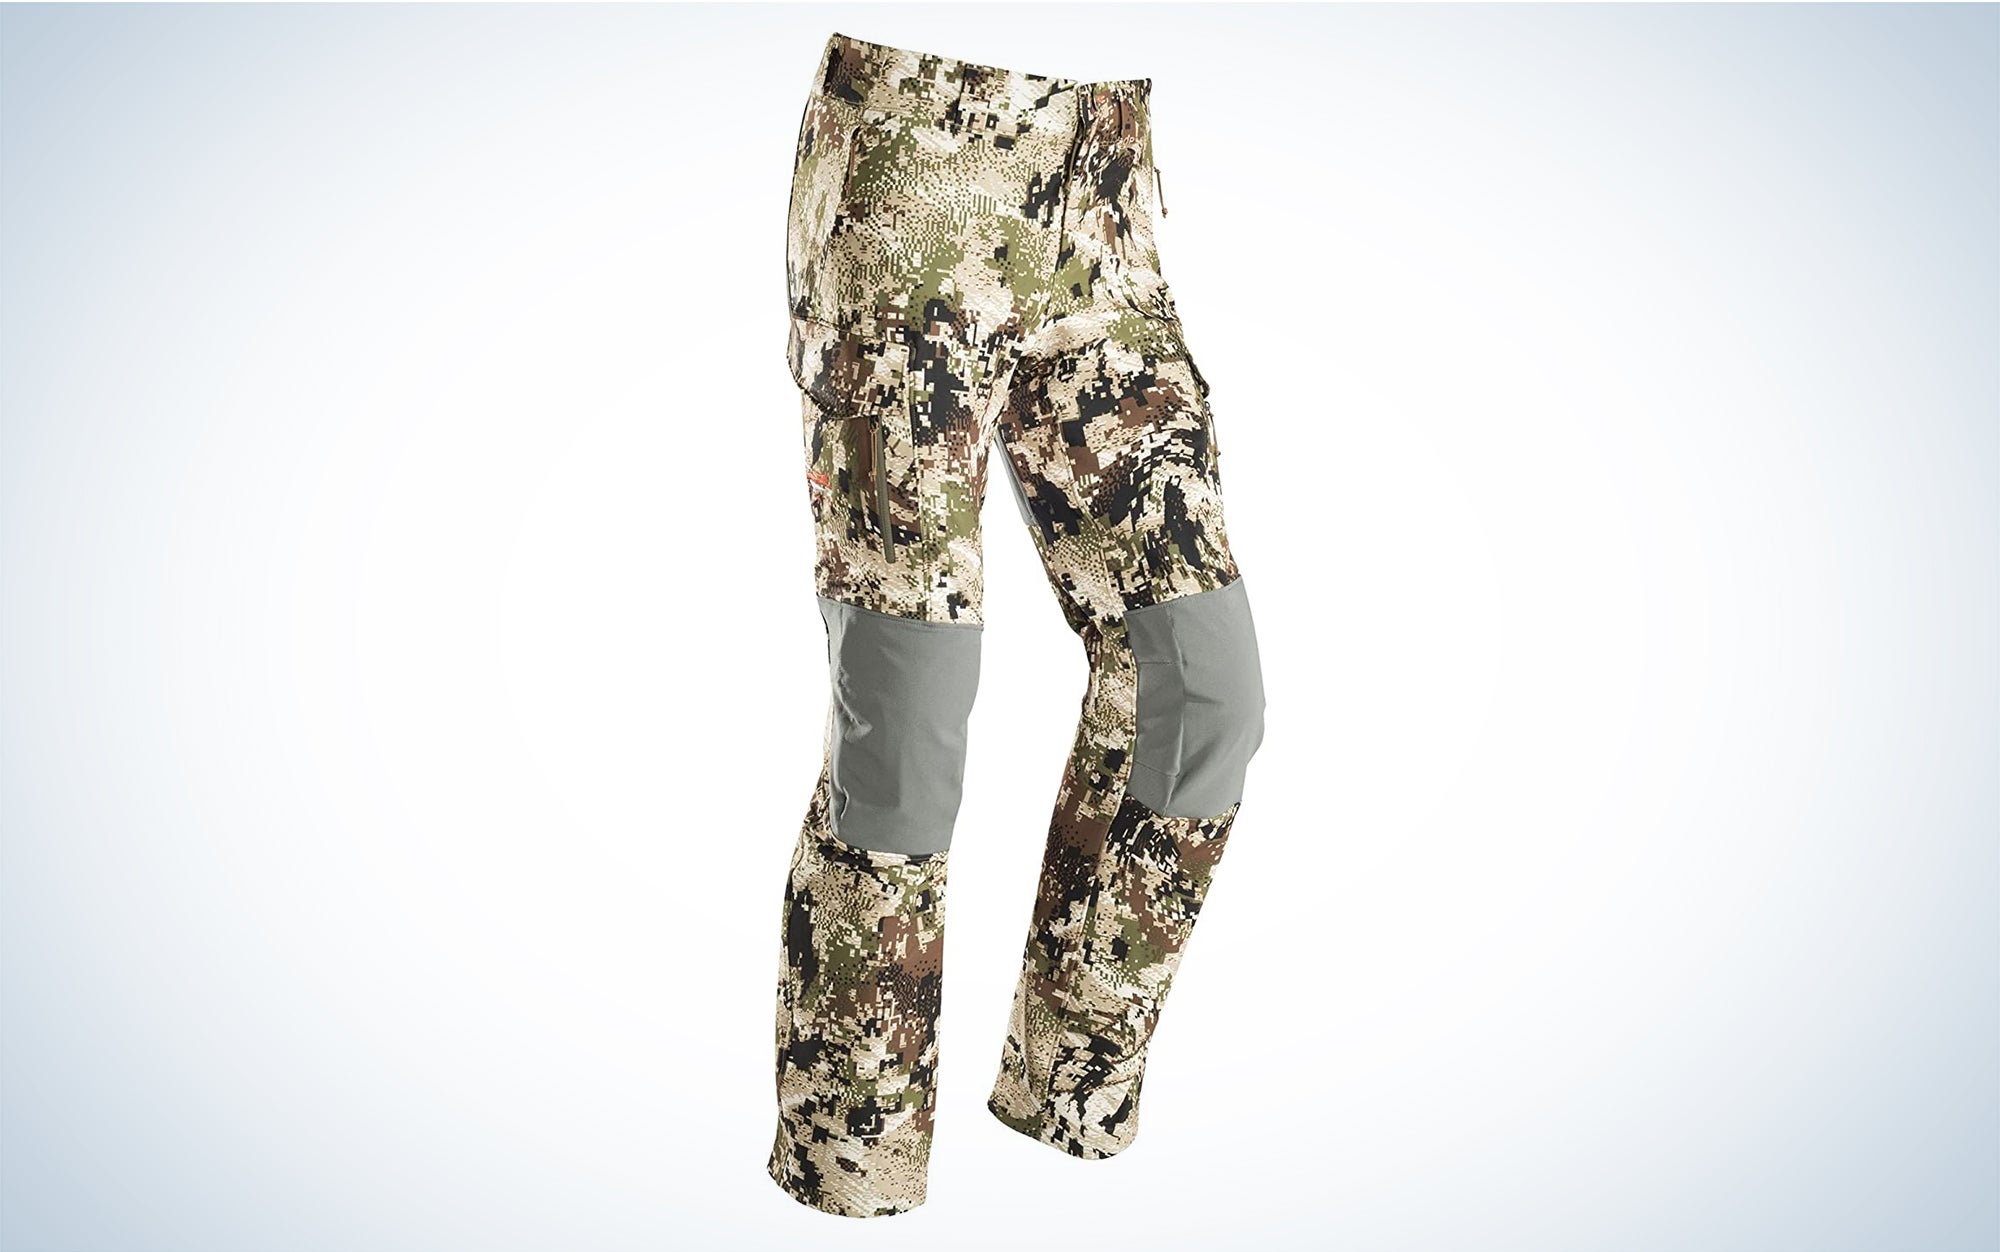 SITKA Timberline women's hunting pants are available in subalpine camouflage.